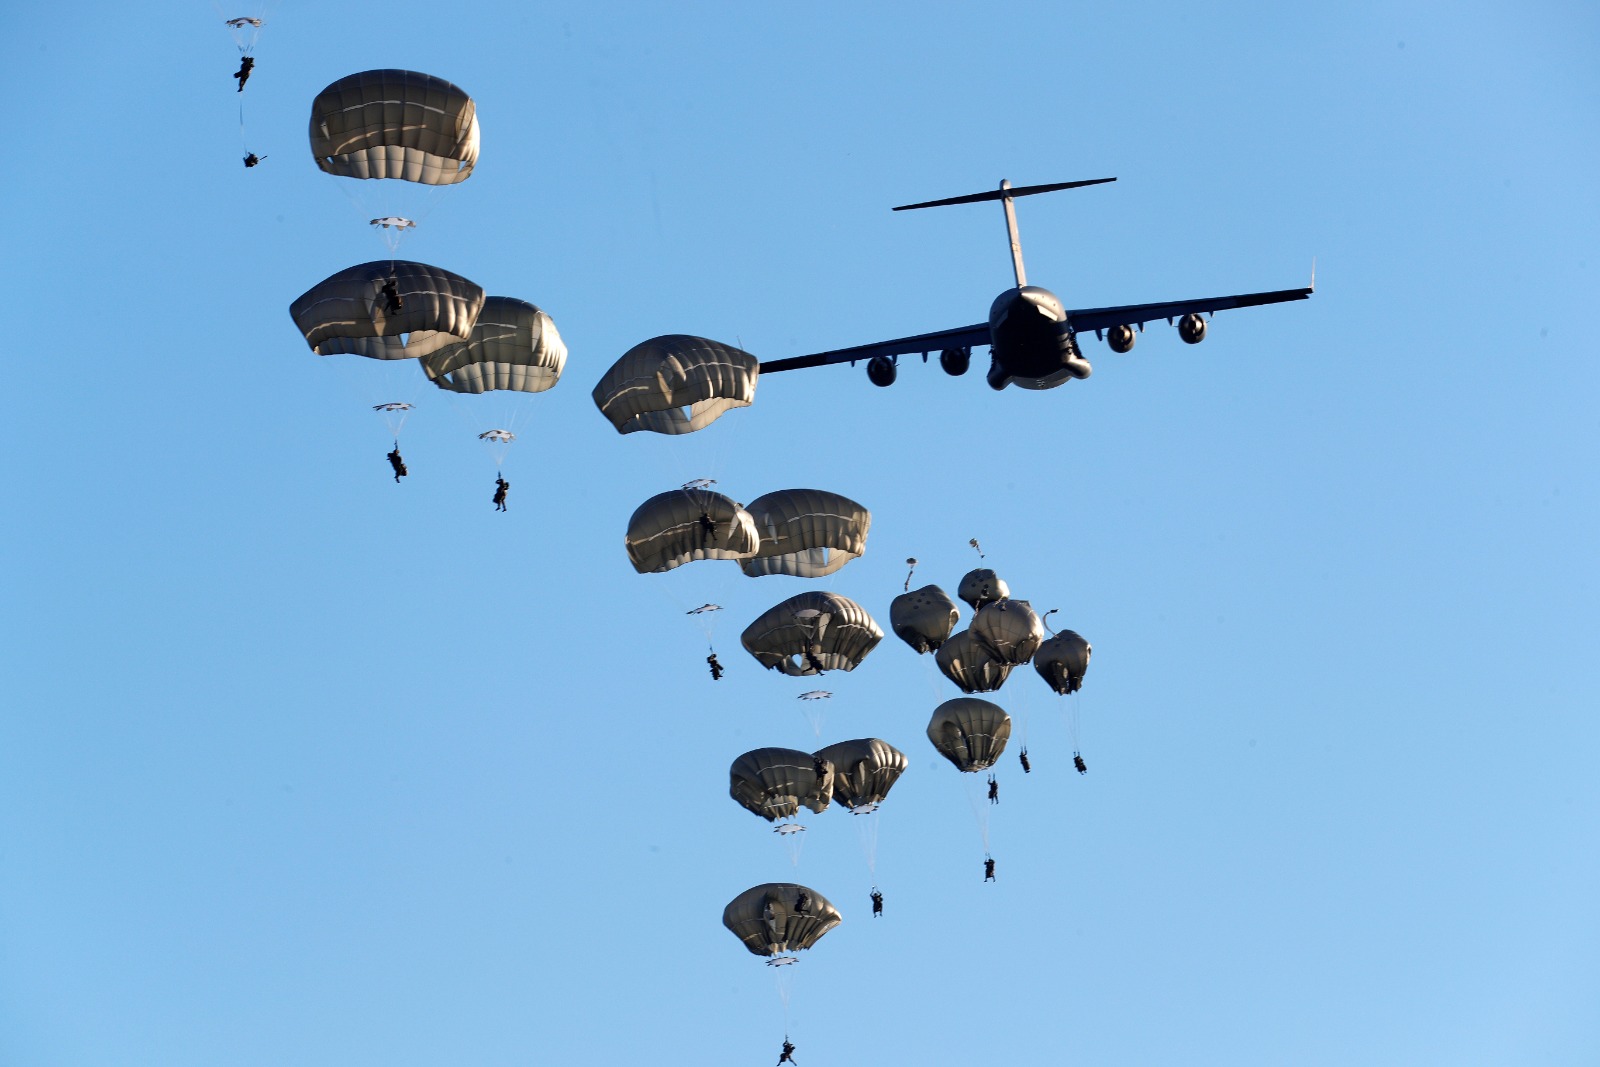 Russian Paratroopers Were Critical To Stopping Germany's World War 